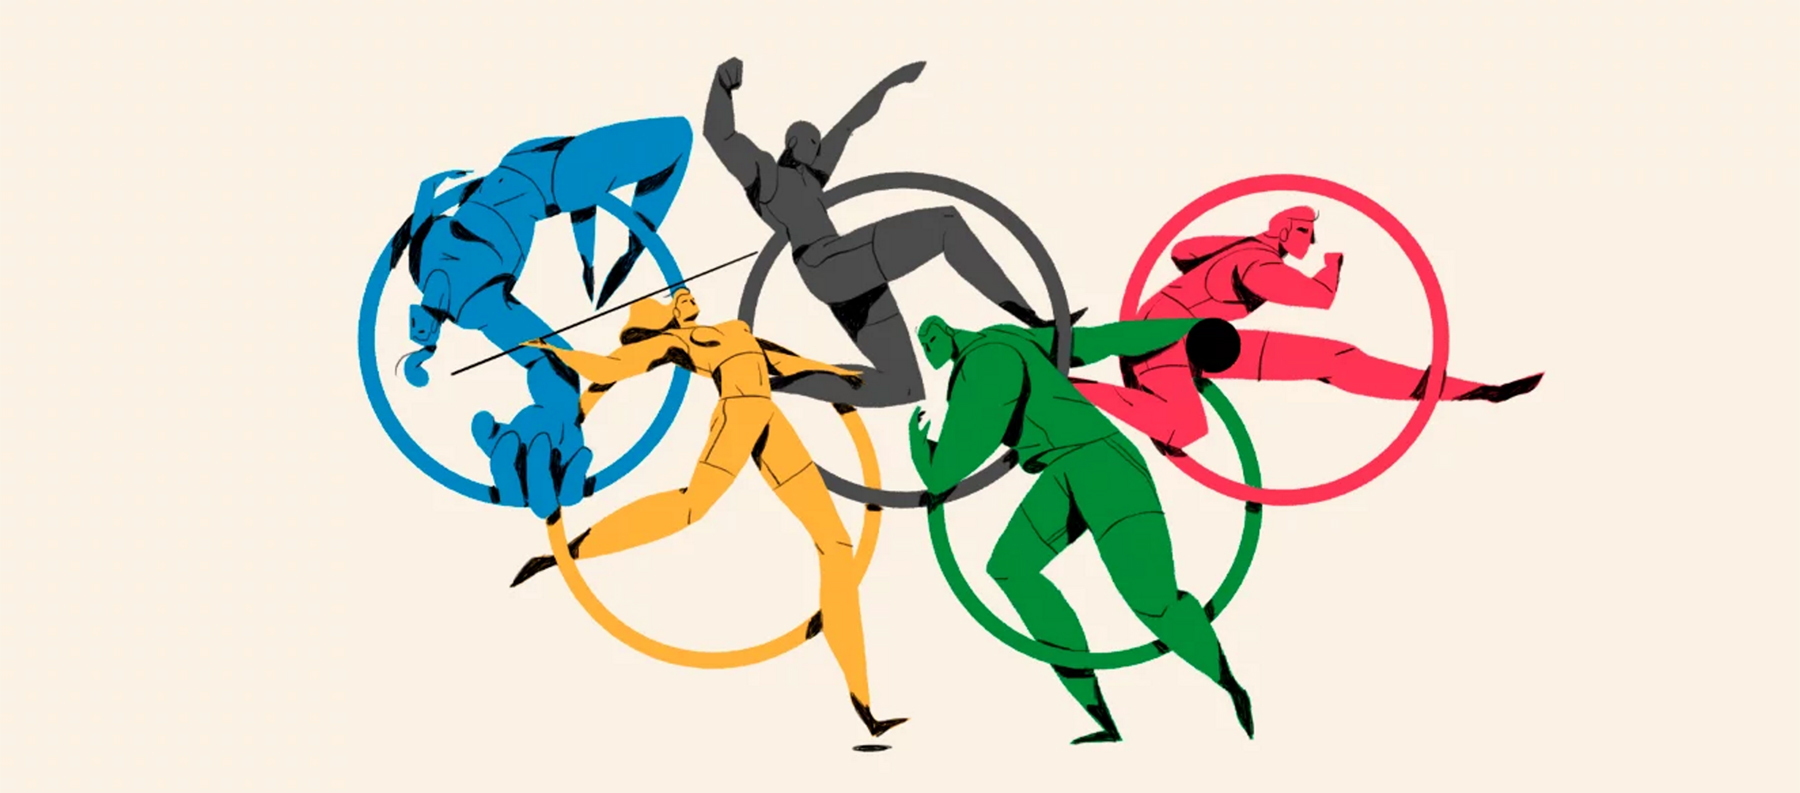 olympic animation: athletes represent the symbol's five rings